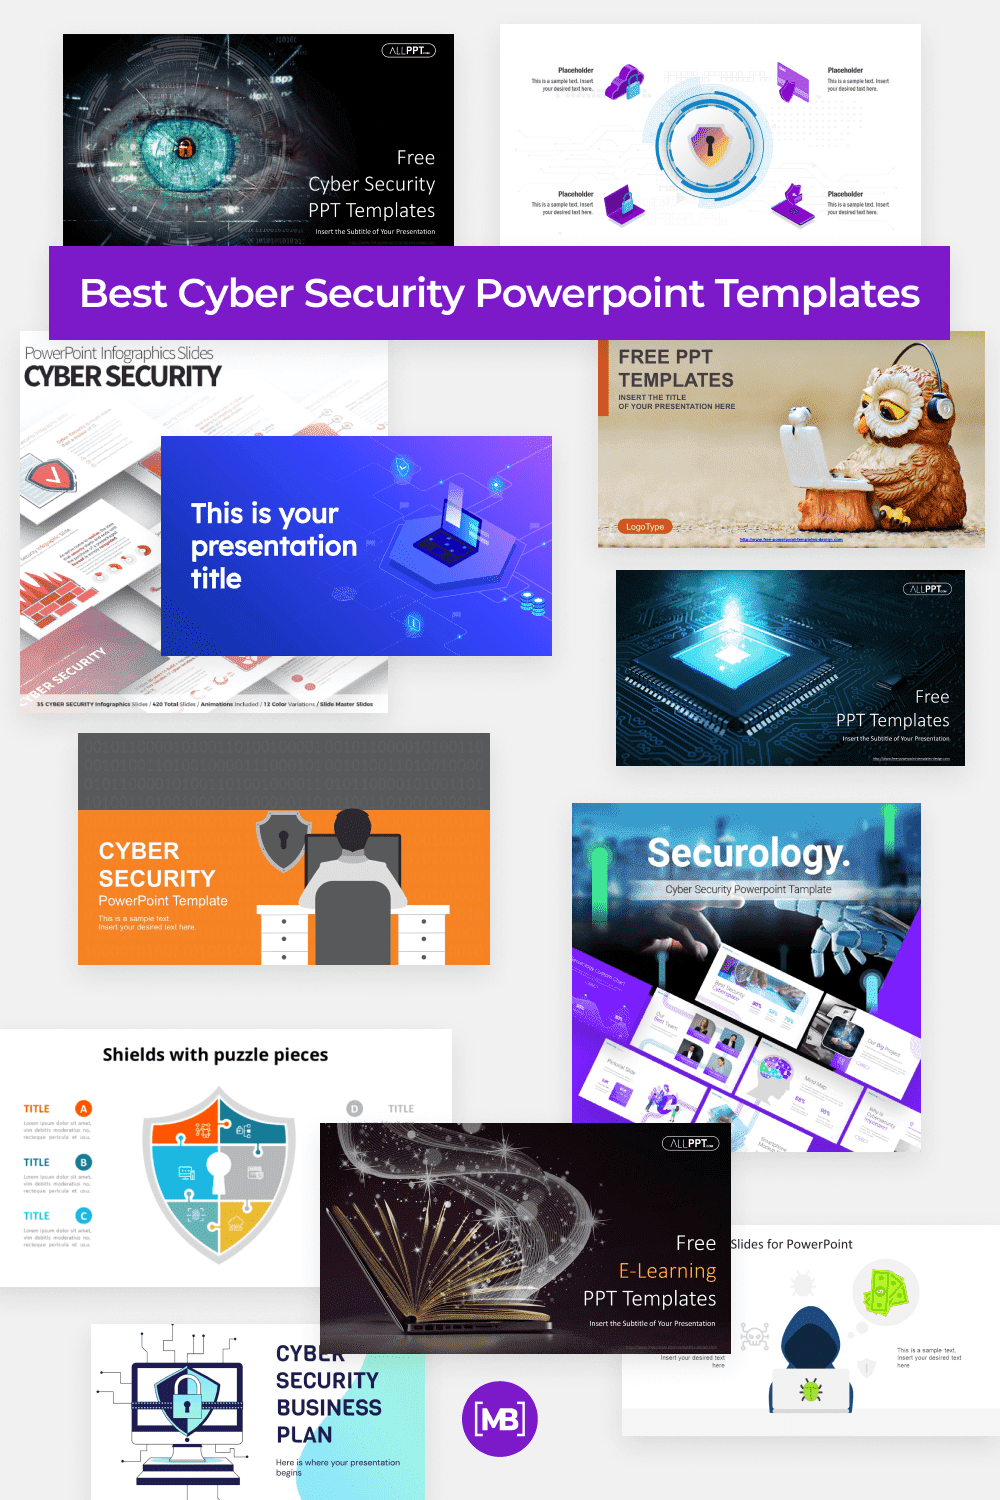 Cyber Security PowerPoint Templates Pinterest.